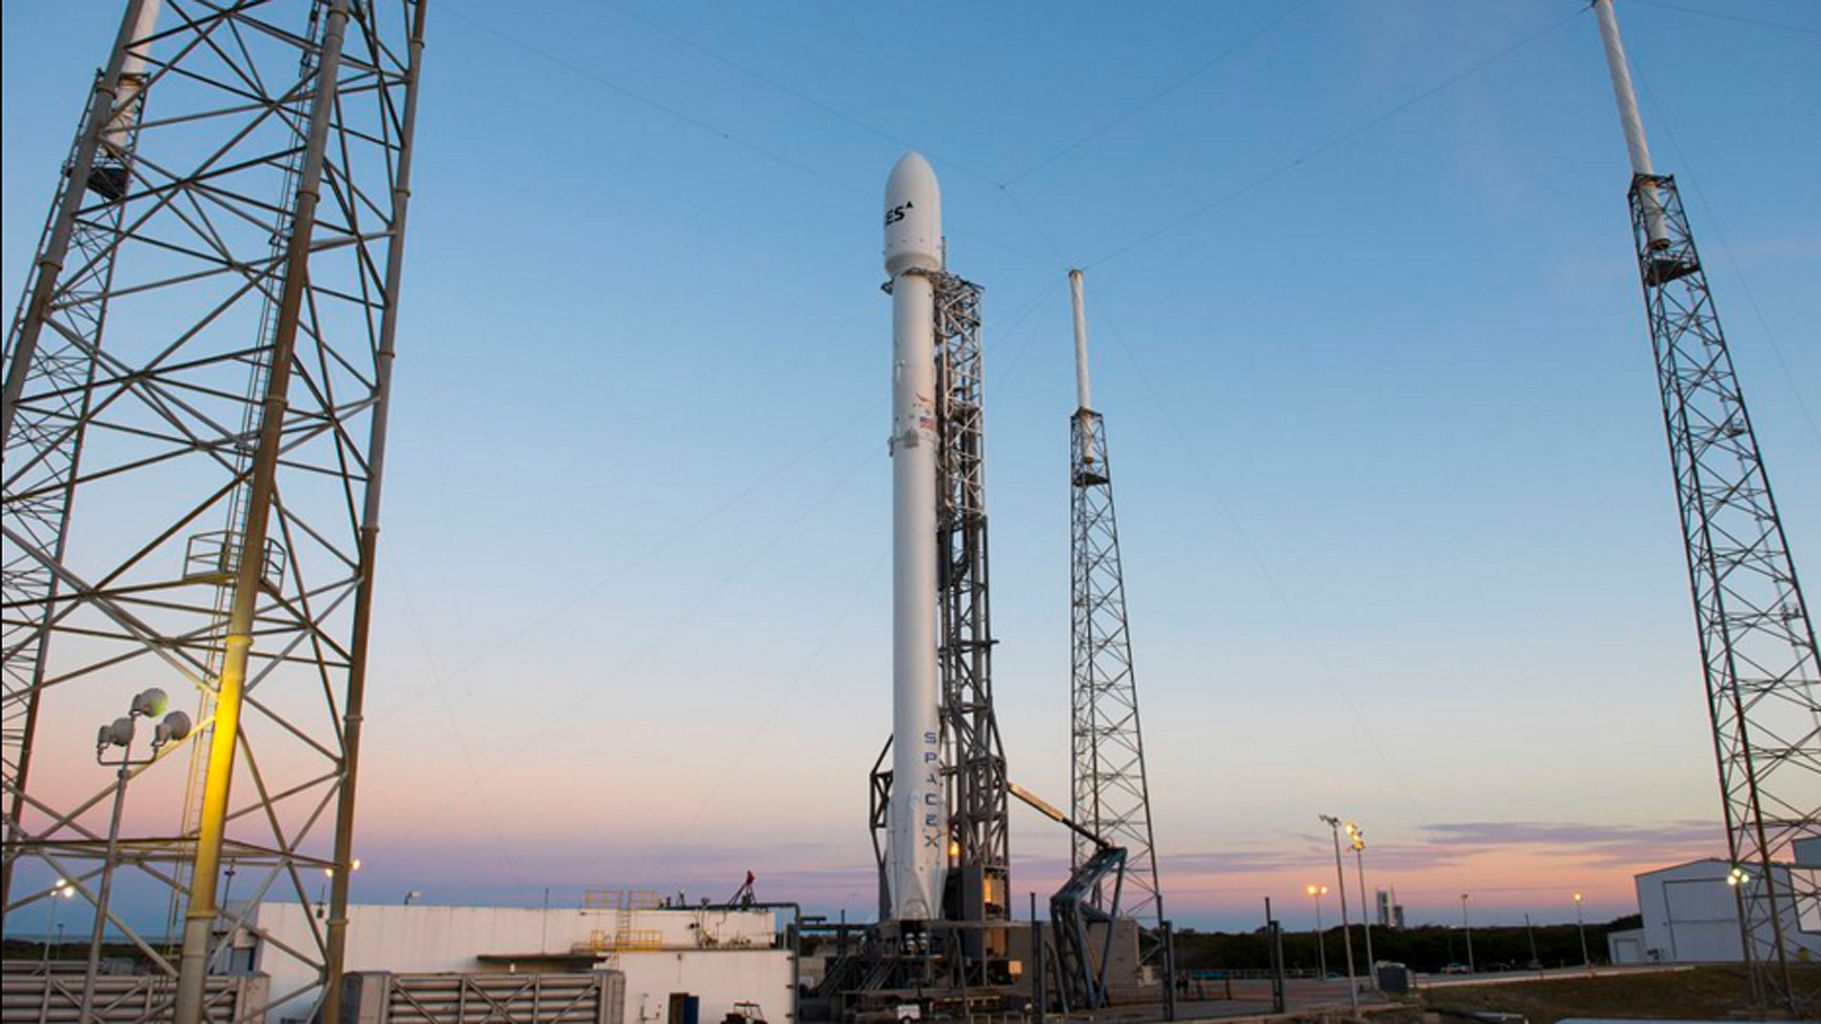 At the last second, Elon Musk’s SpaceX scrubbed plans to launch a Falcon 9 rocket, delaying an attempt to put a satellite into orbit. (Photo: Twitter/ <a href="https://twitter.com/SpaceX">@SpaceX</a>)